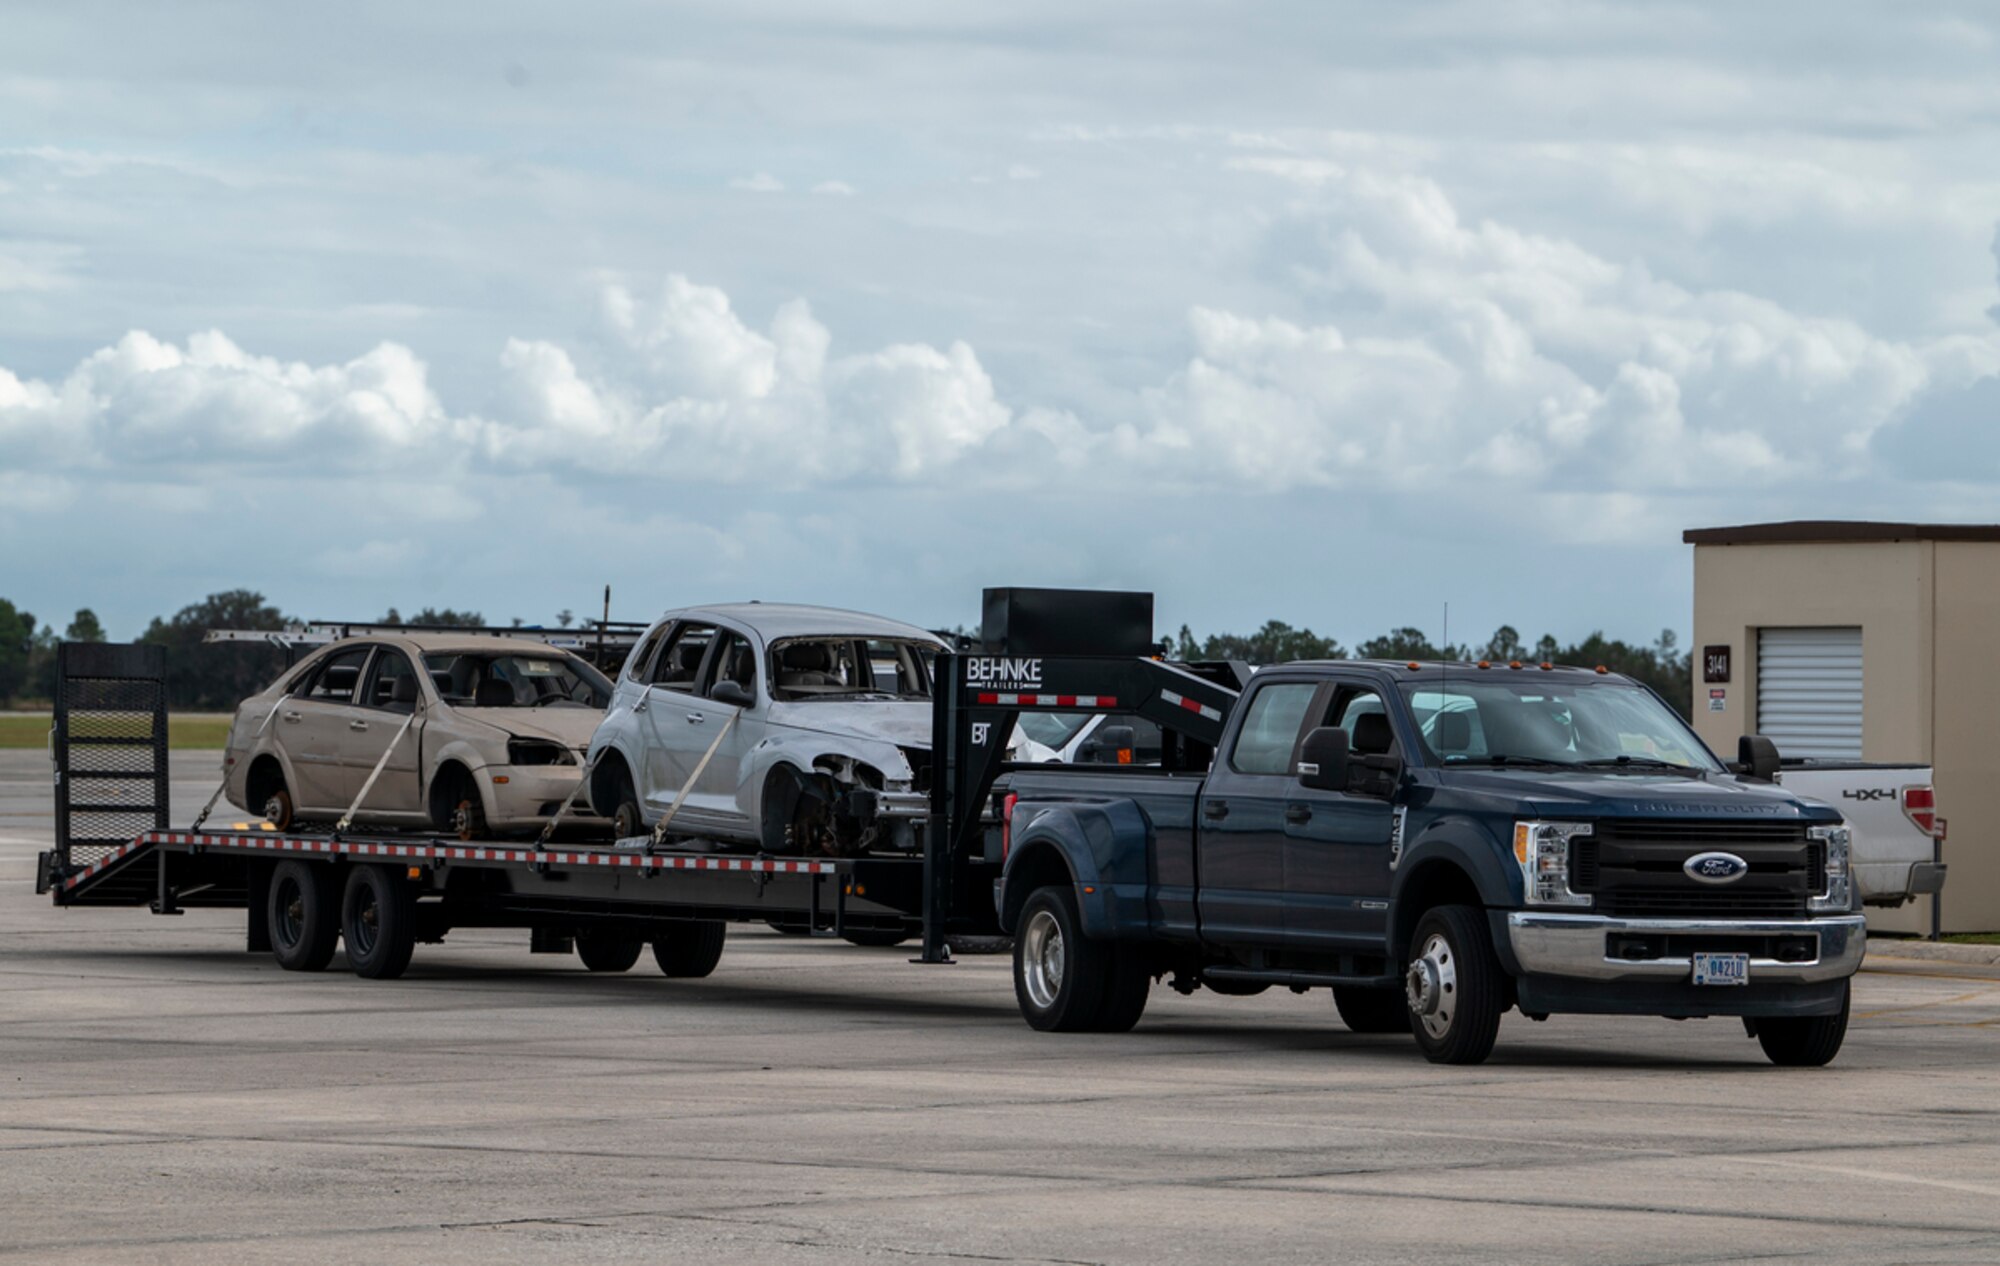 Vehicles are delivered at Avon Park Air Force Range, Florida, Nov 13. 2023, for training targets for A-10C Thunderbolt II pilots during exercise Mosaic Tiger 24-1. Close-air-support and strafing runs are planned throughout the week as part of honing agile-combat-employment concepts. (U.S. Air Force photo by Airman 1st Class Leonid Soubbotine)